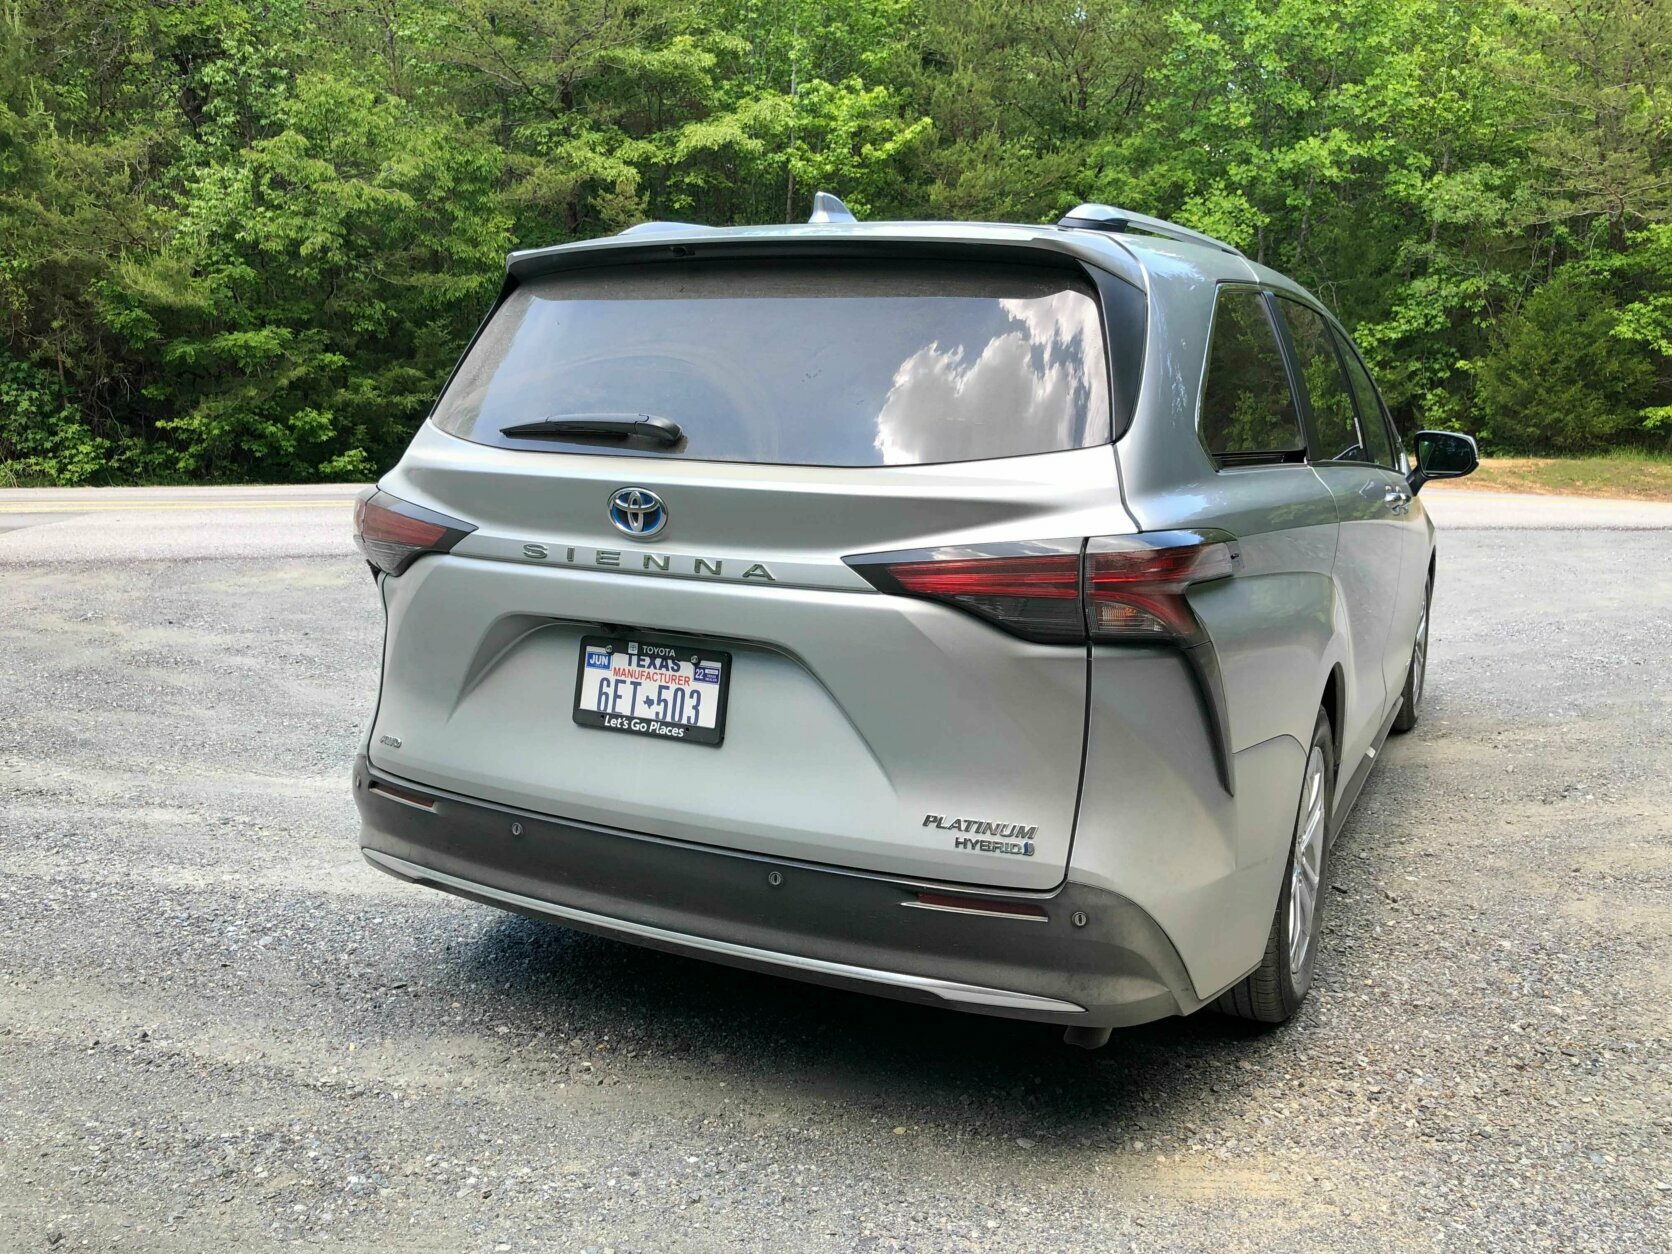 <p>Once underway, the Sienna is a confident cruiser with a pleasant ride on the highway and daily commute. With available AWD, the Sienna will be easy to drive year-round.</p>
<hr />
<ul>
<li><a href="https://wtop.com/lifestyle/car-reviews/" target="_blank" rel="noopener"><strong>More Car Reviews</strong></a></li>
<li><a href="https://wtop.com/lifestyle/" target="_blank" rel="noopener"><strong>Lifestyle News</strong></a></li>
</ul>
<hr />
<p>&nbsp;</p>
